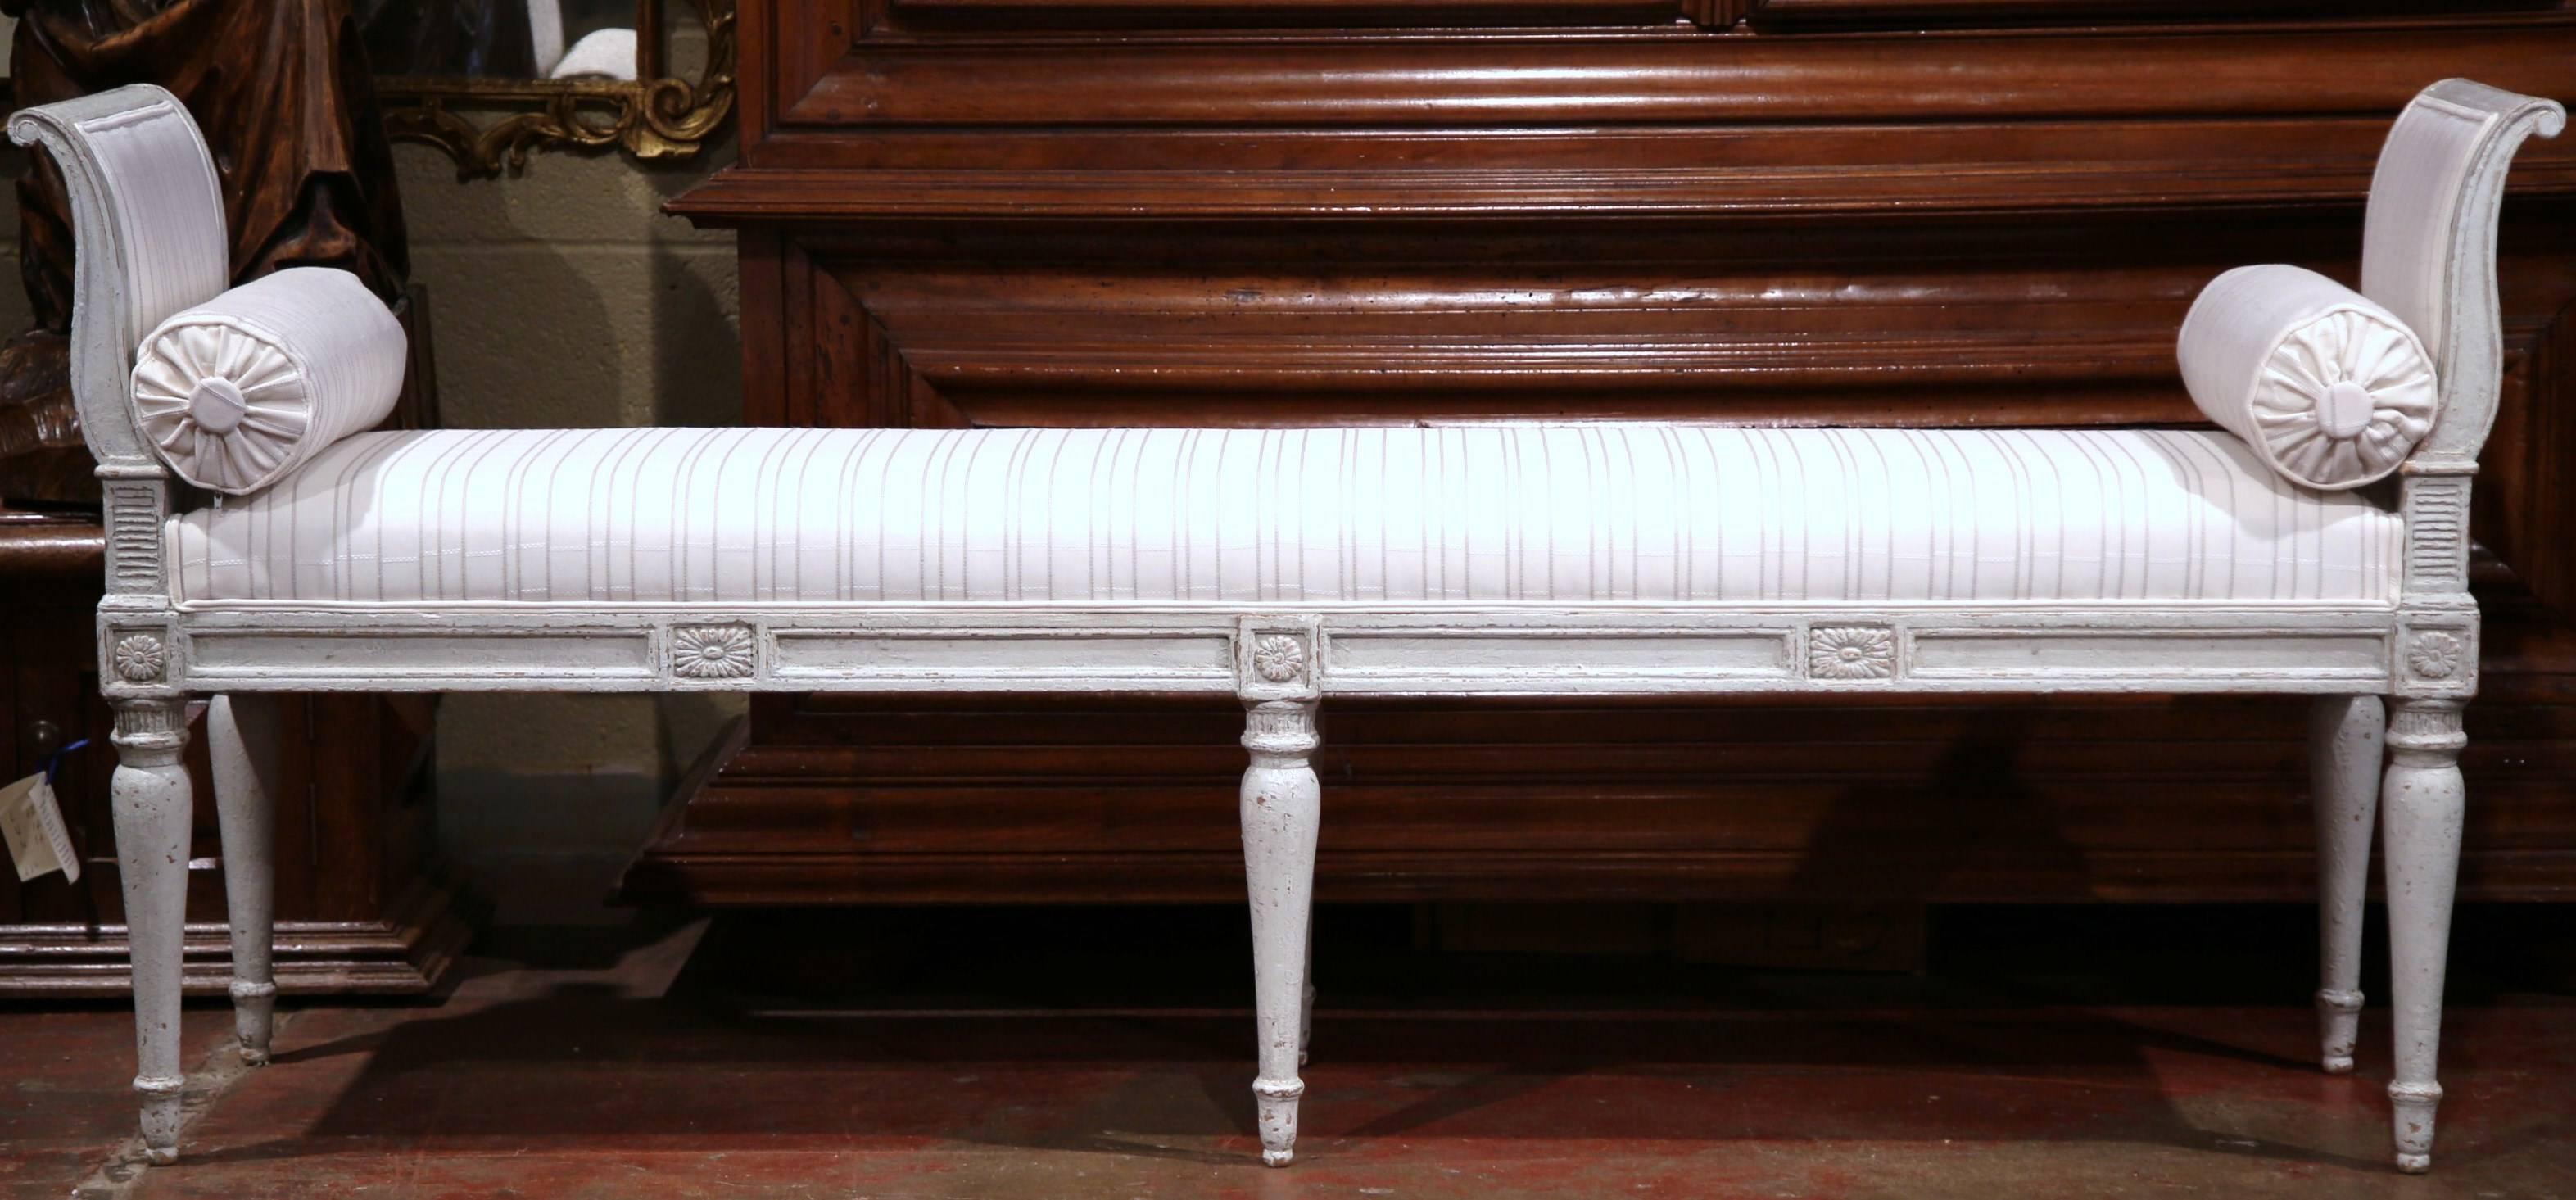 This elegant, antique banquette was crafted in France, circa 1880. The long and narrow bench features six turned and tapered legs, a curved back at each end and hand carved medallion motifs around the apron. The seat has been reupholstered with a